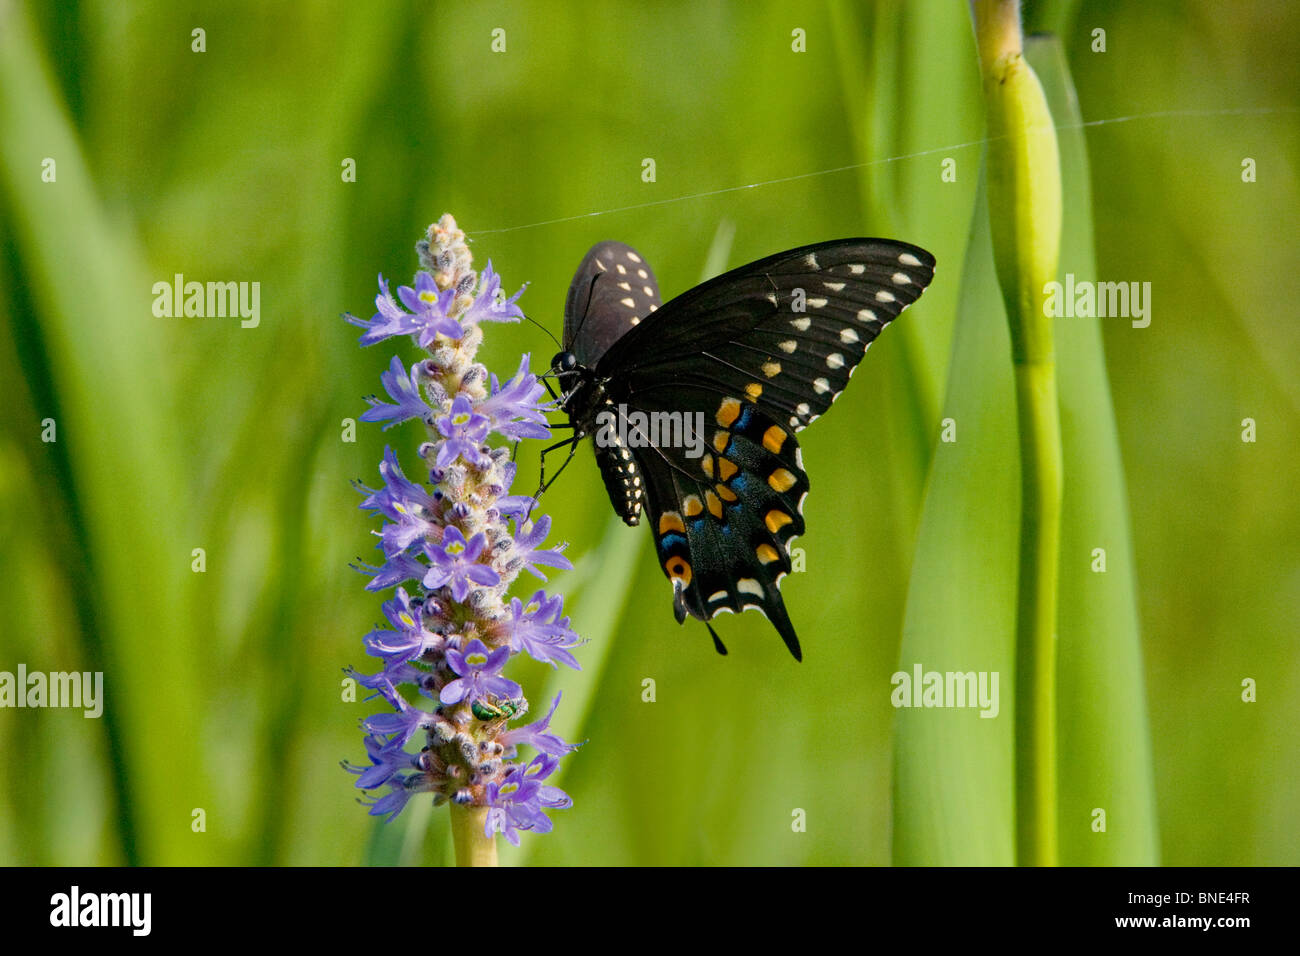 Black Swallowtail butterfly (Papilio polyxenes) pollinating a pickerel weed flower Stock Photo